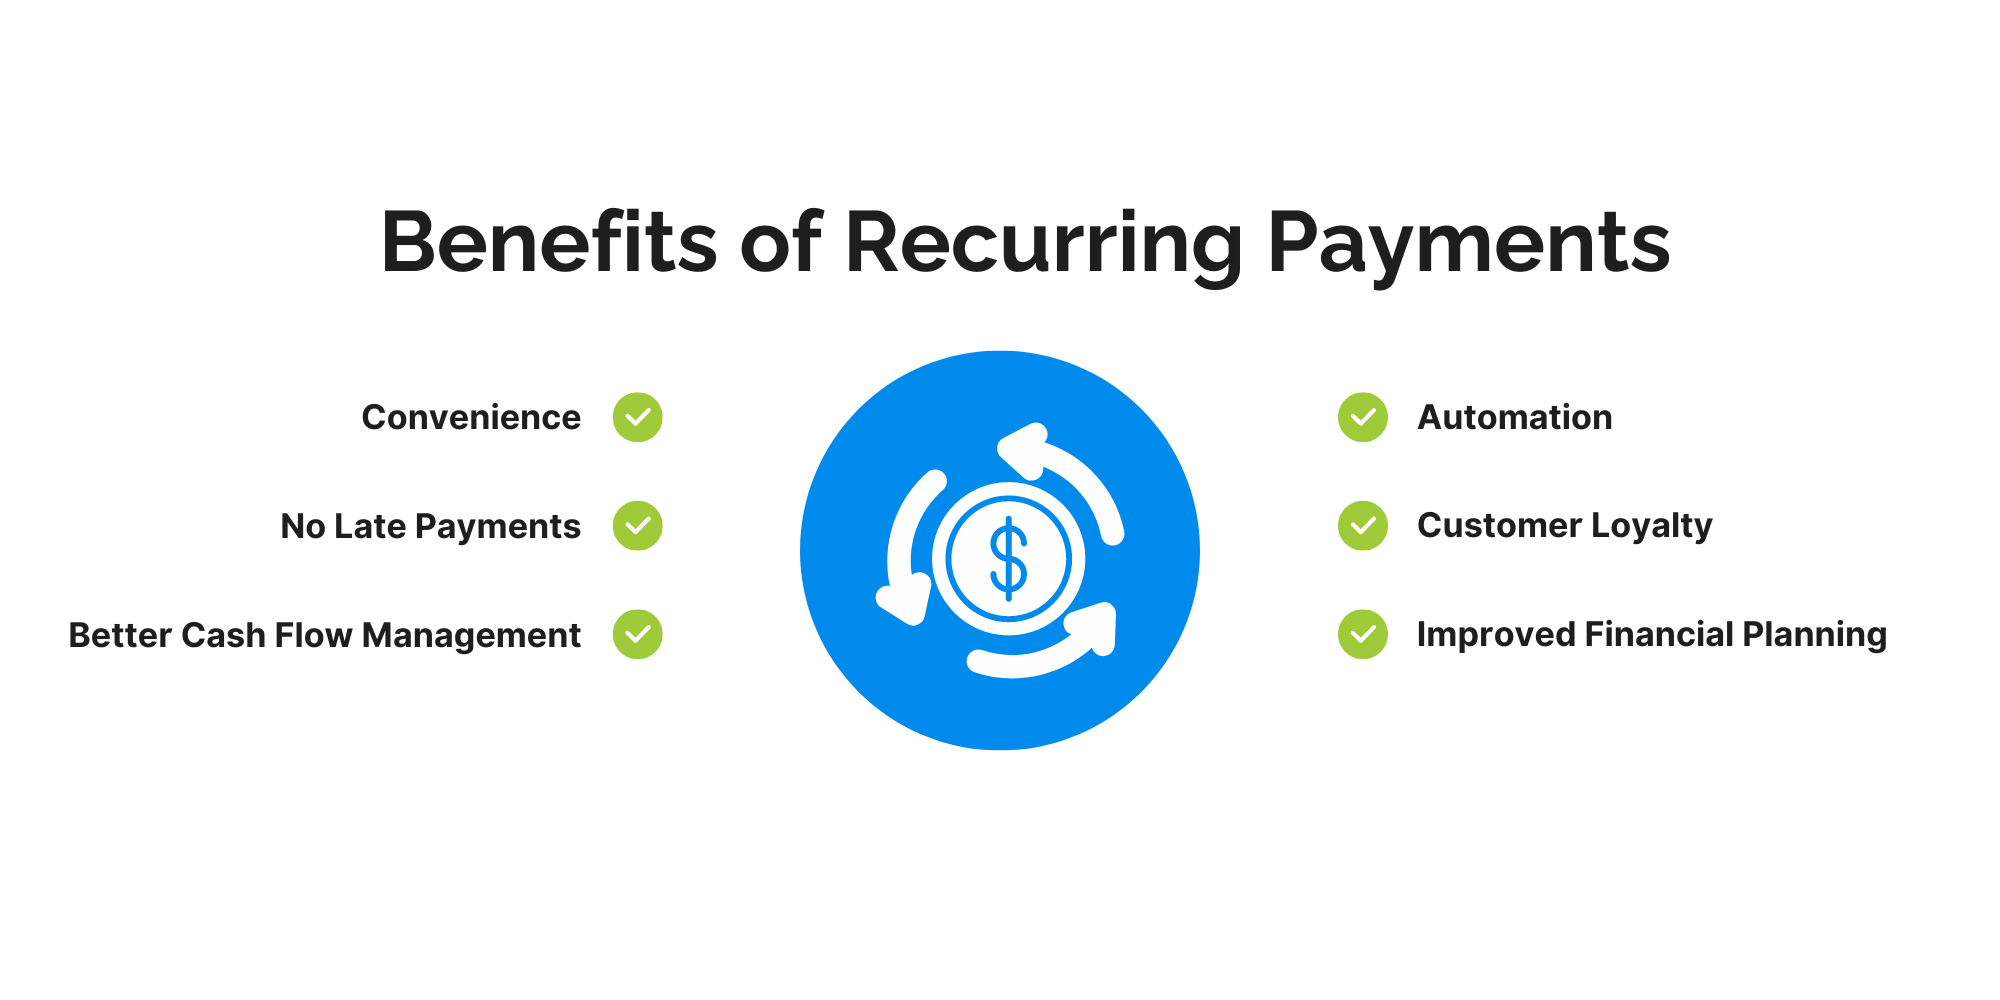 benefits of recurring payments infographic 